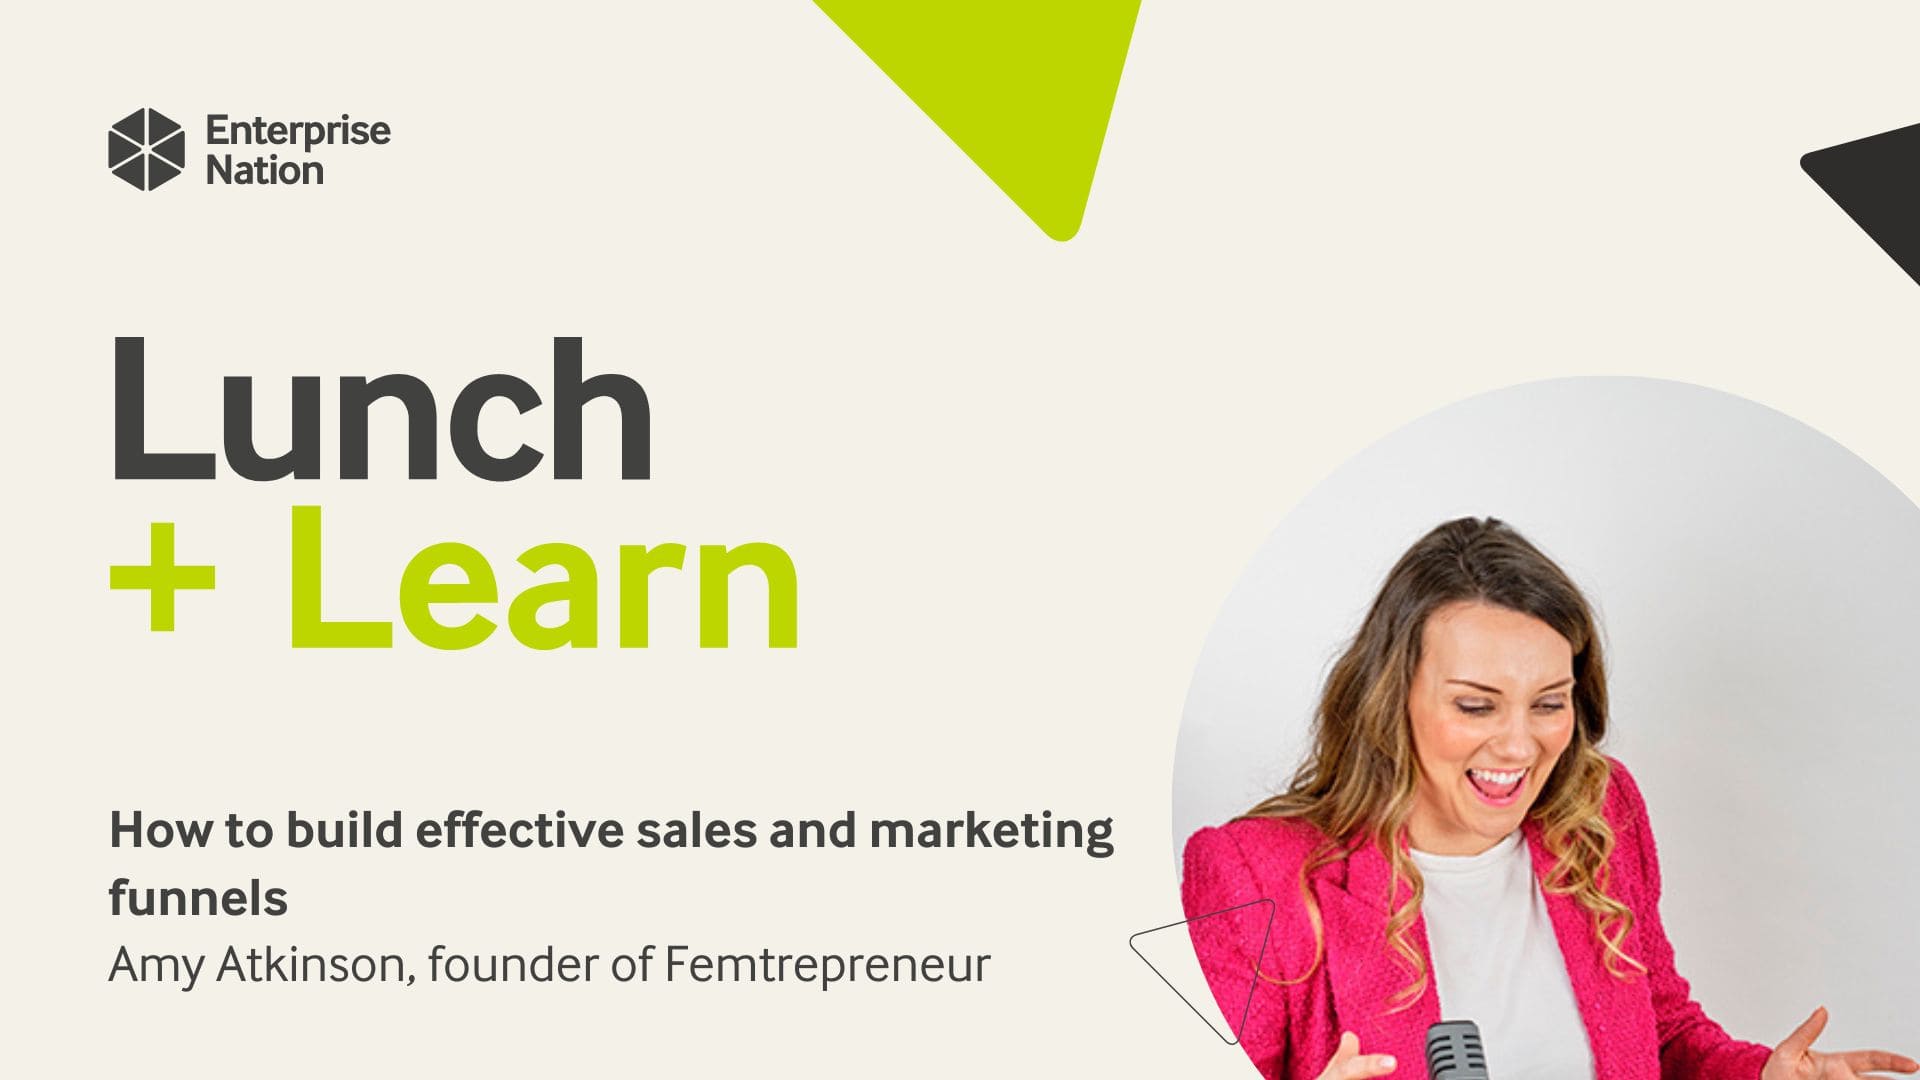 Lunch and Learn: How to build effective sales and marketing funnels